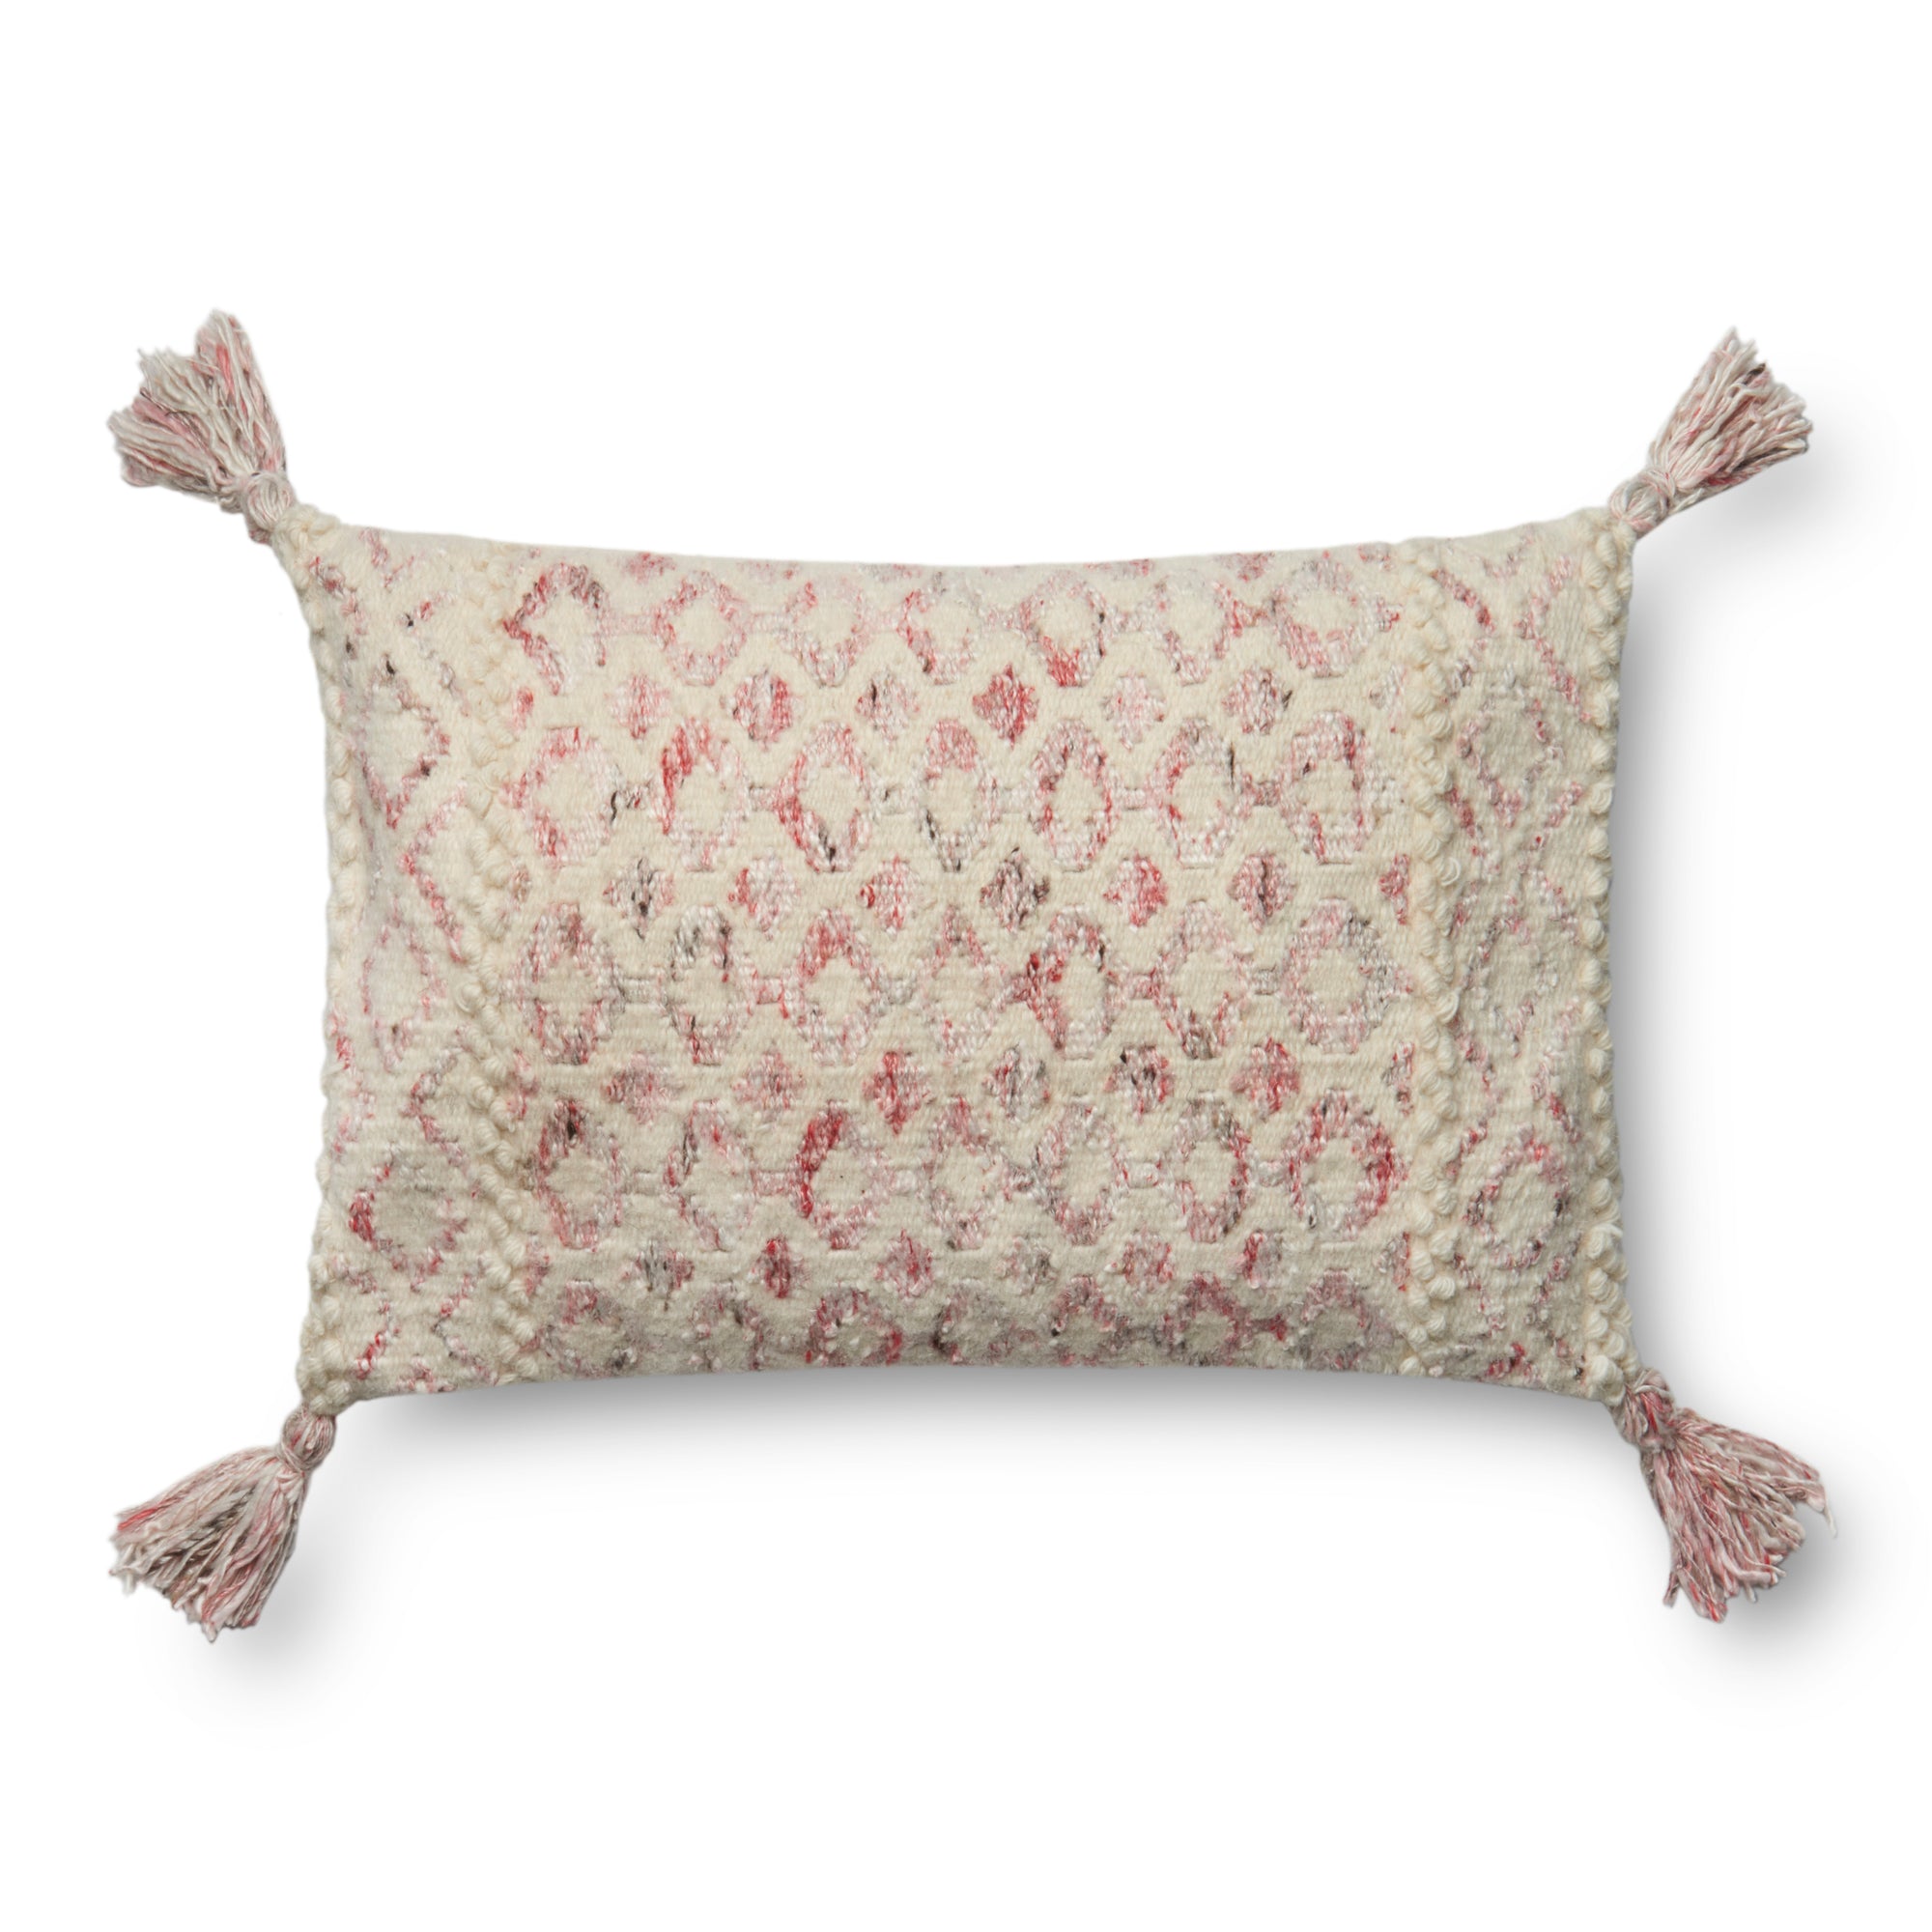 Rugs by Roo |  Loloi Justina Blakeney Pink Ivory Wool Pillow 18" x 18" Cover w/Poly